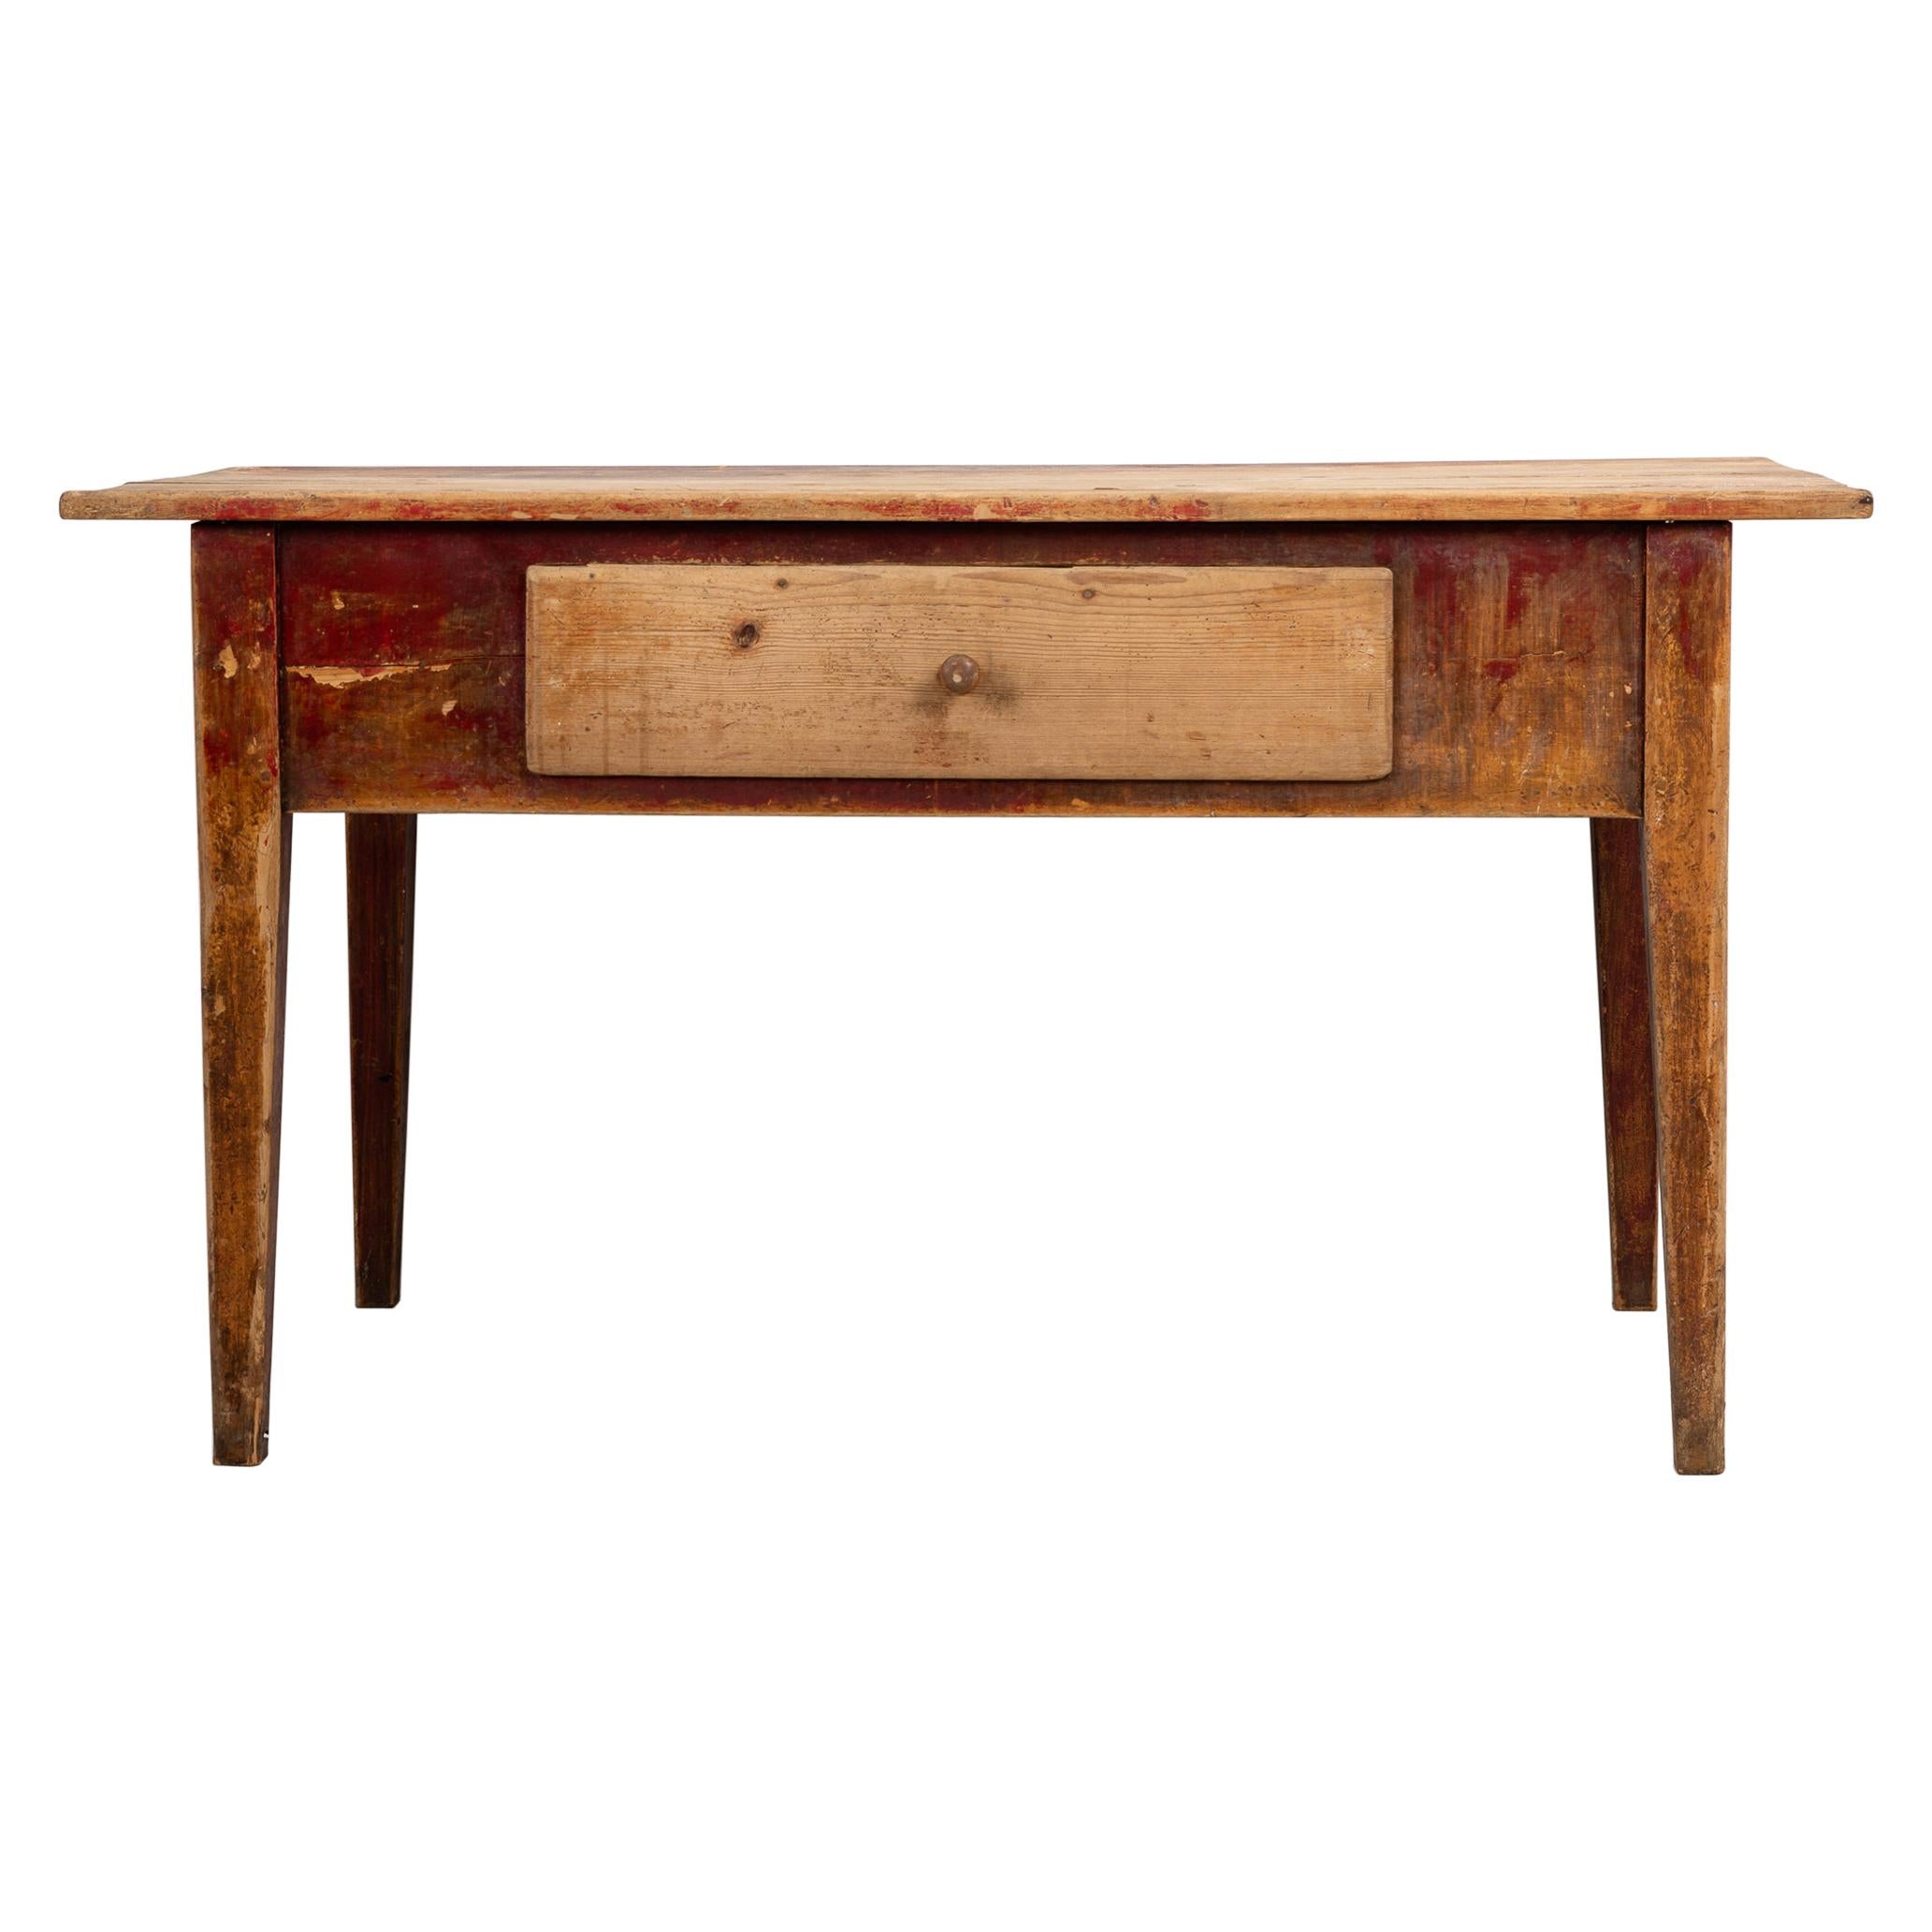 Early 19th Century Swedish Gustavian Style Country Work Table